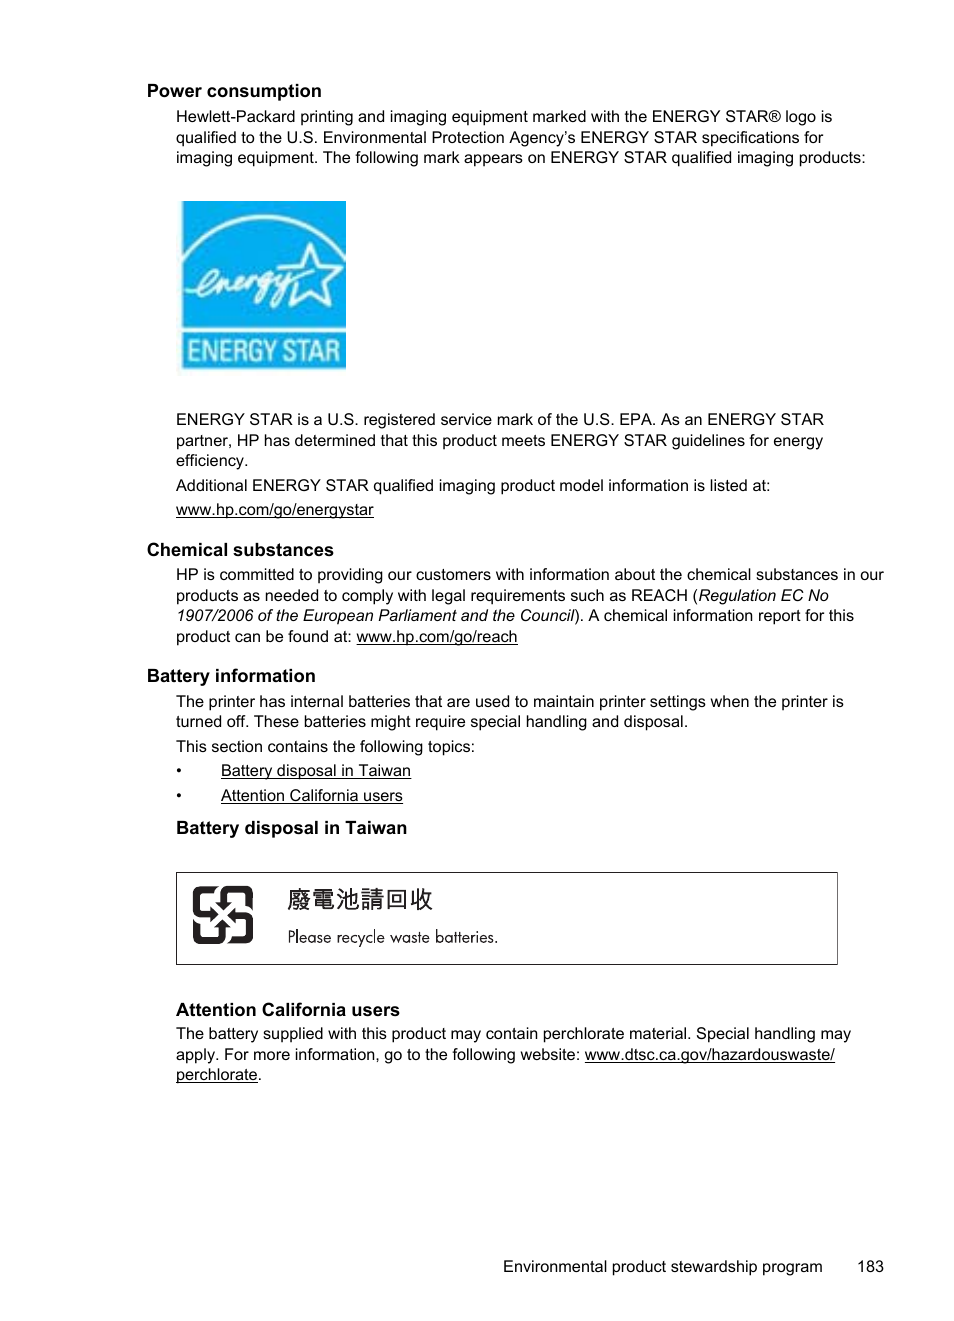 Power consumption, Chemical substances, Battery information | Battery disposal in taiwan, Attention california users | HP Officejet Pro 8600 User Manual | Page 187 / 254